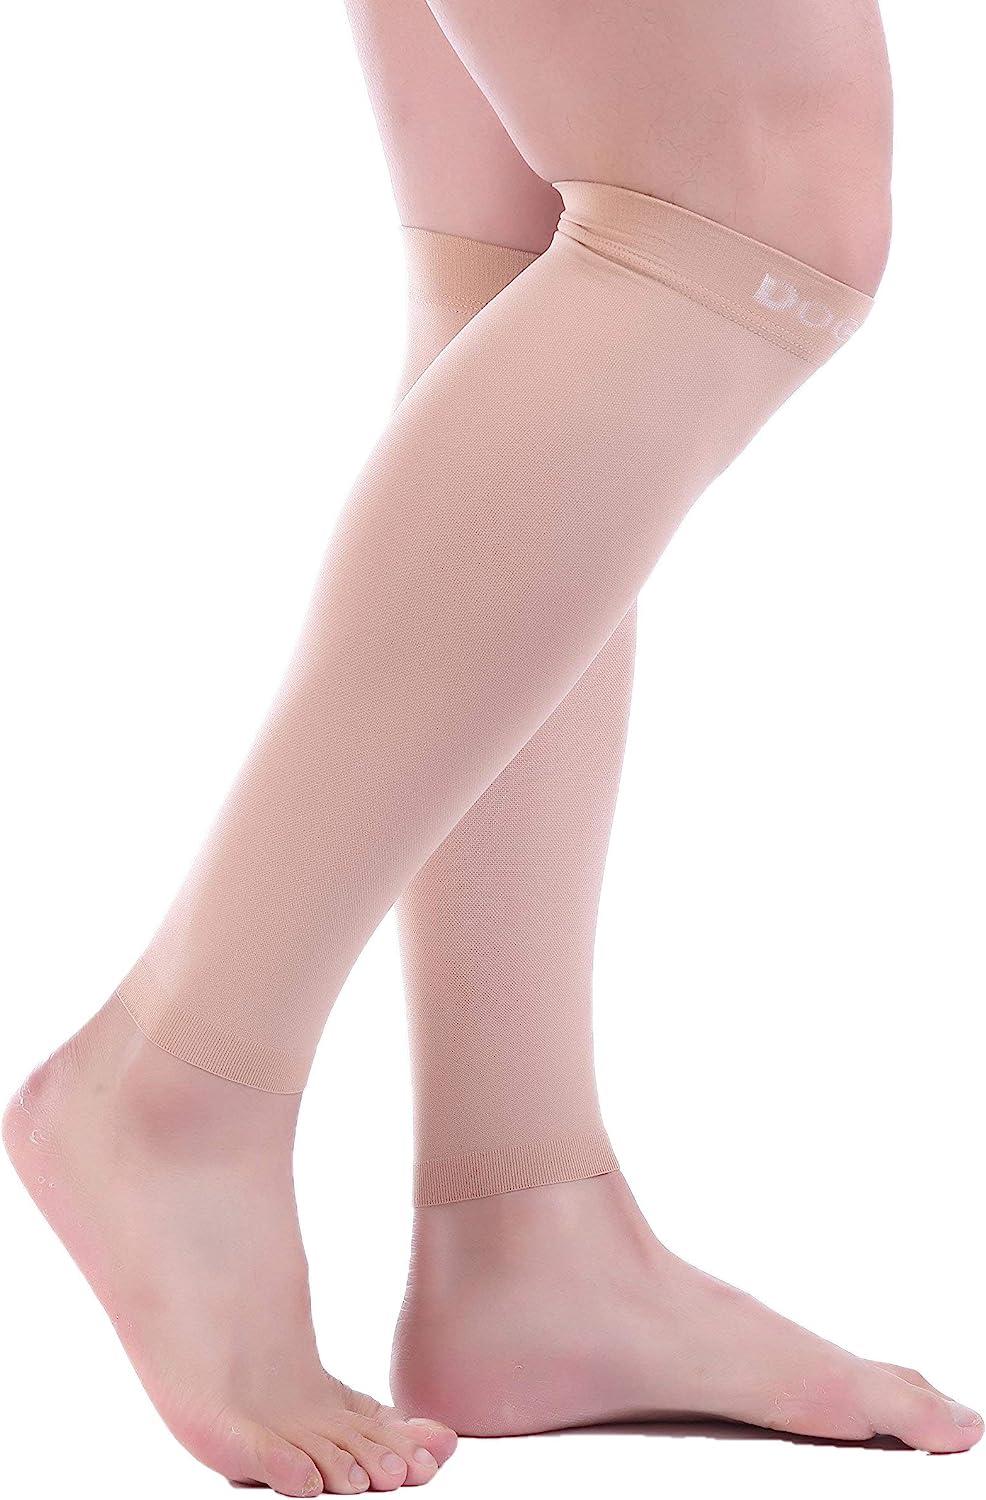 Doc Miller Calf Compression Sleeve Men and Women 20-30 mmHg, Shin Splint  Compression Sleeve for Varicose Veins and Maternity 1 Pair ( Pink Pink  White